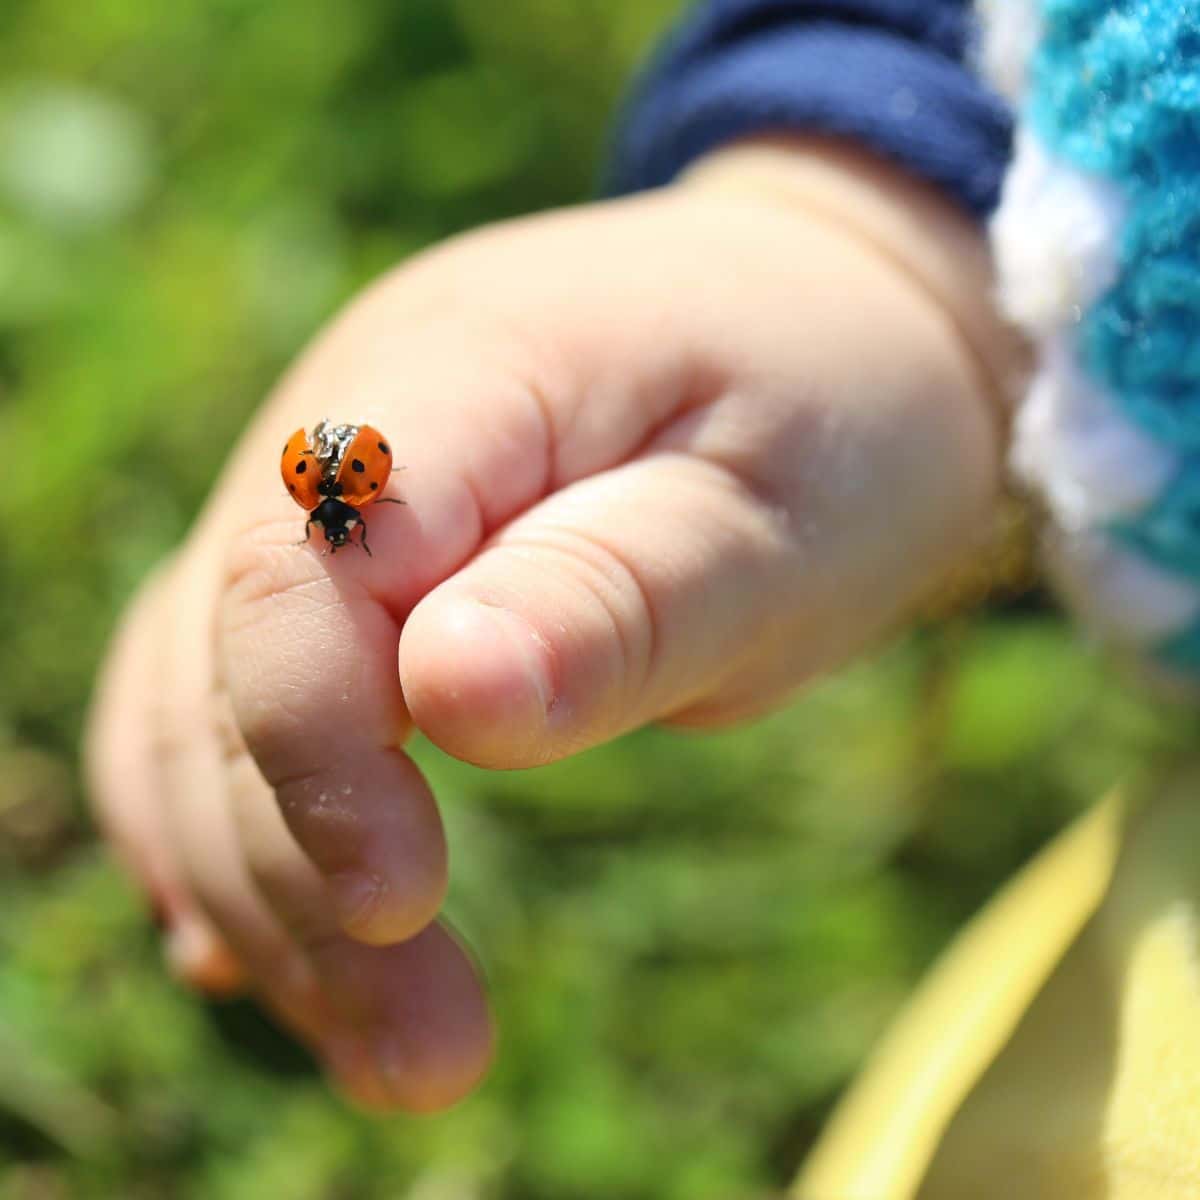 what does it mean when a ladybug lands on you